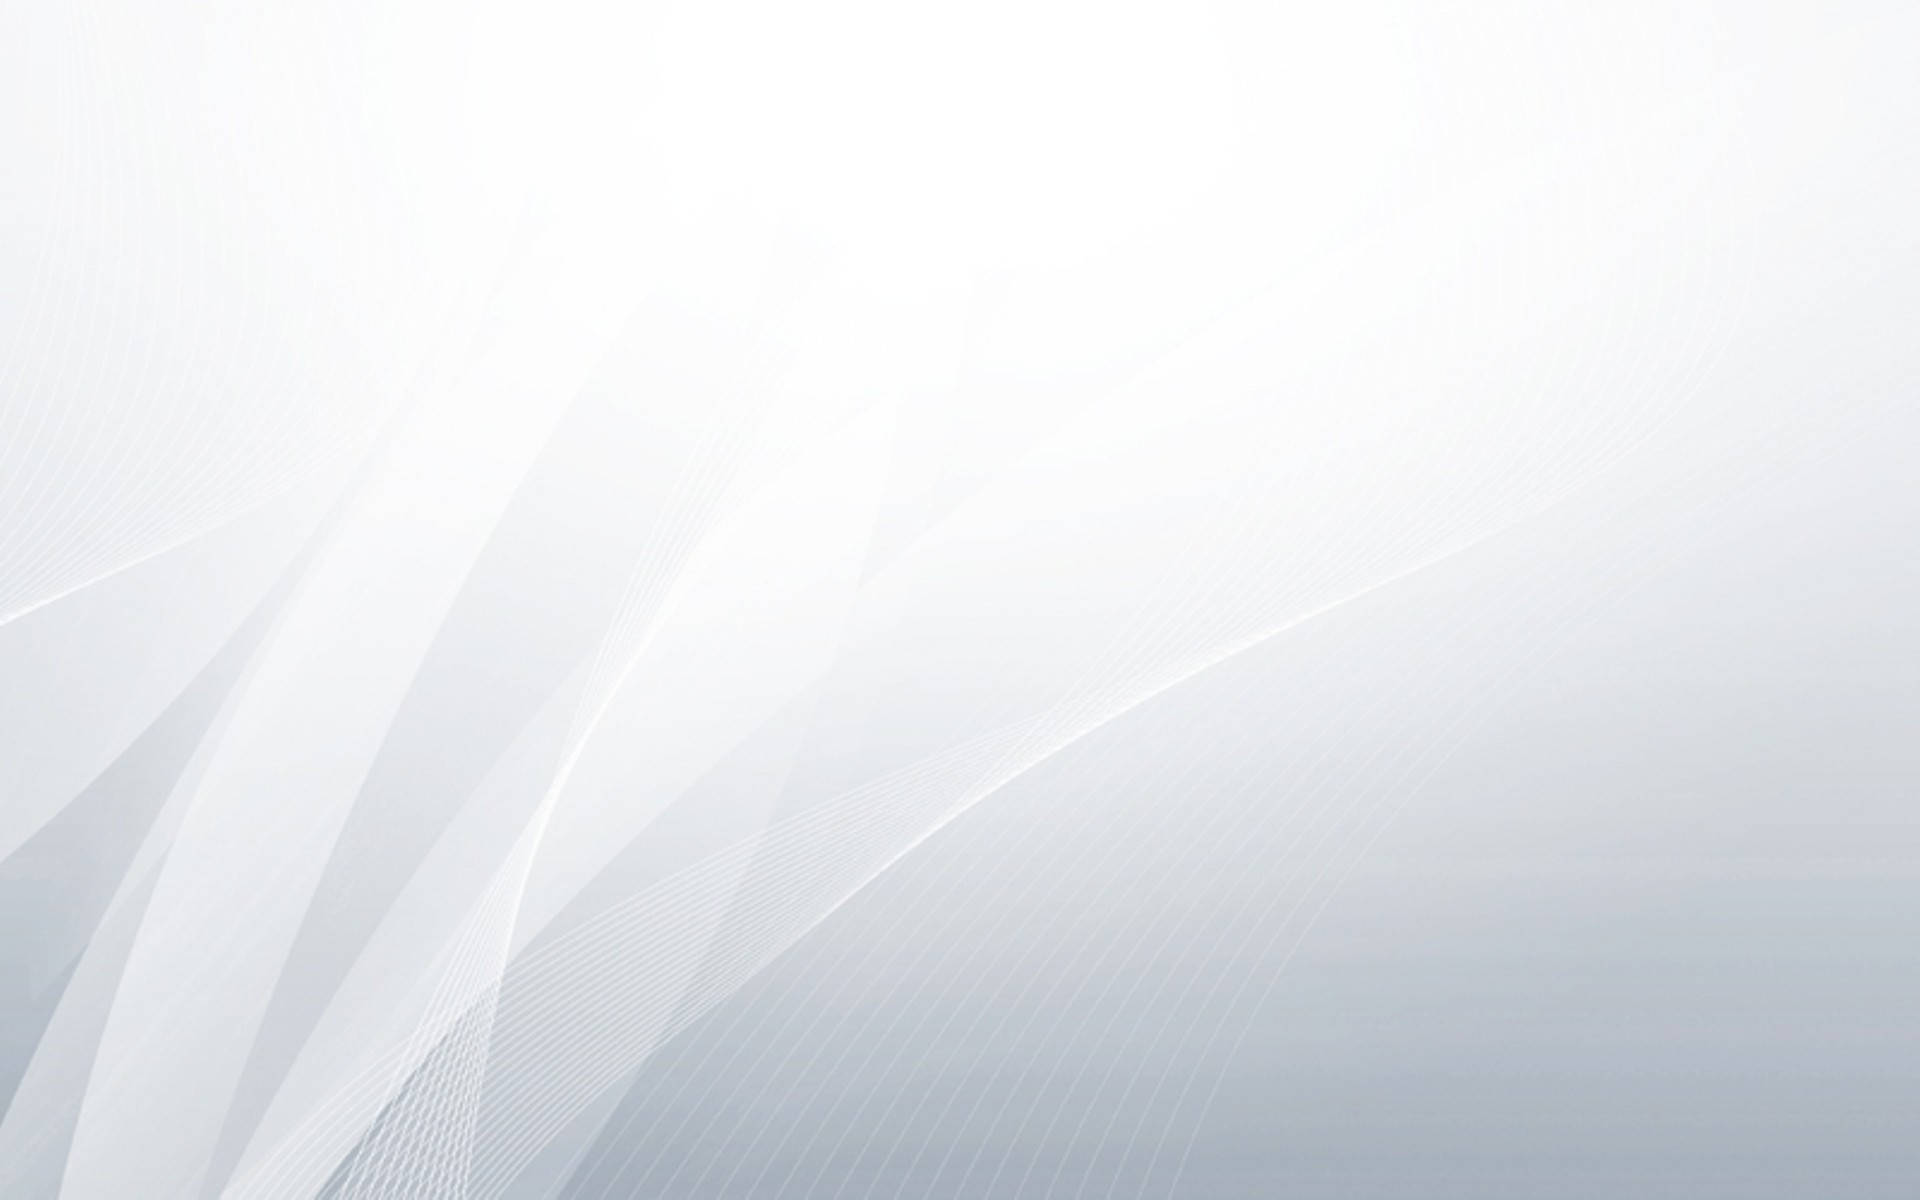 White Hd Abstract Curves Background